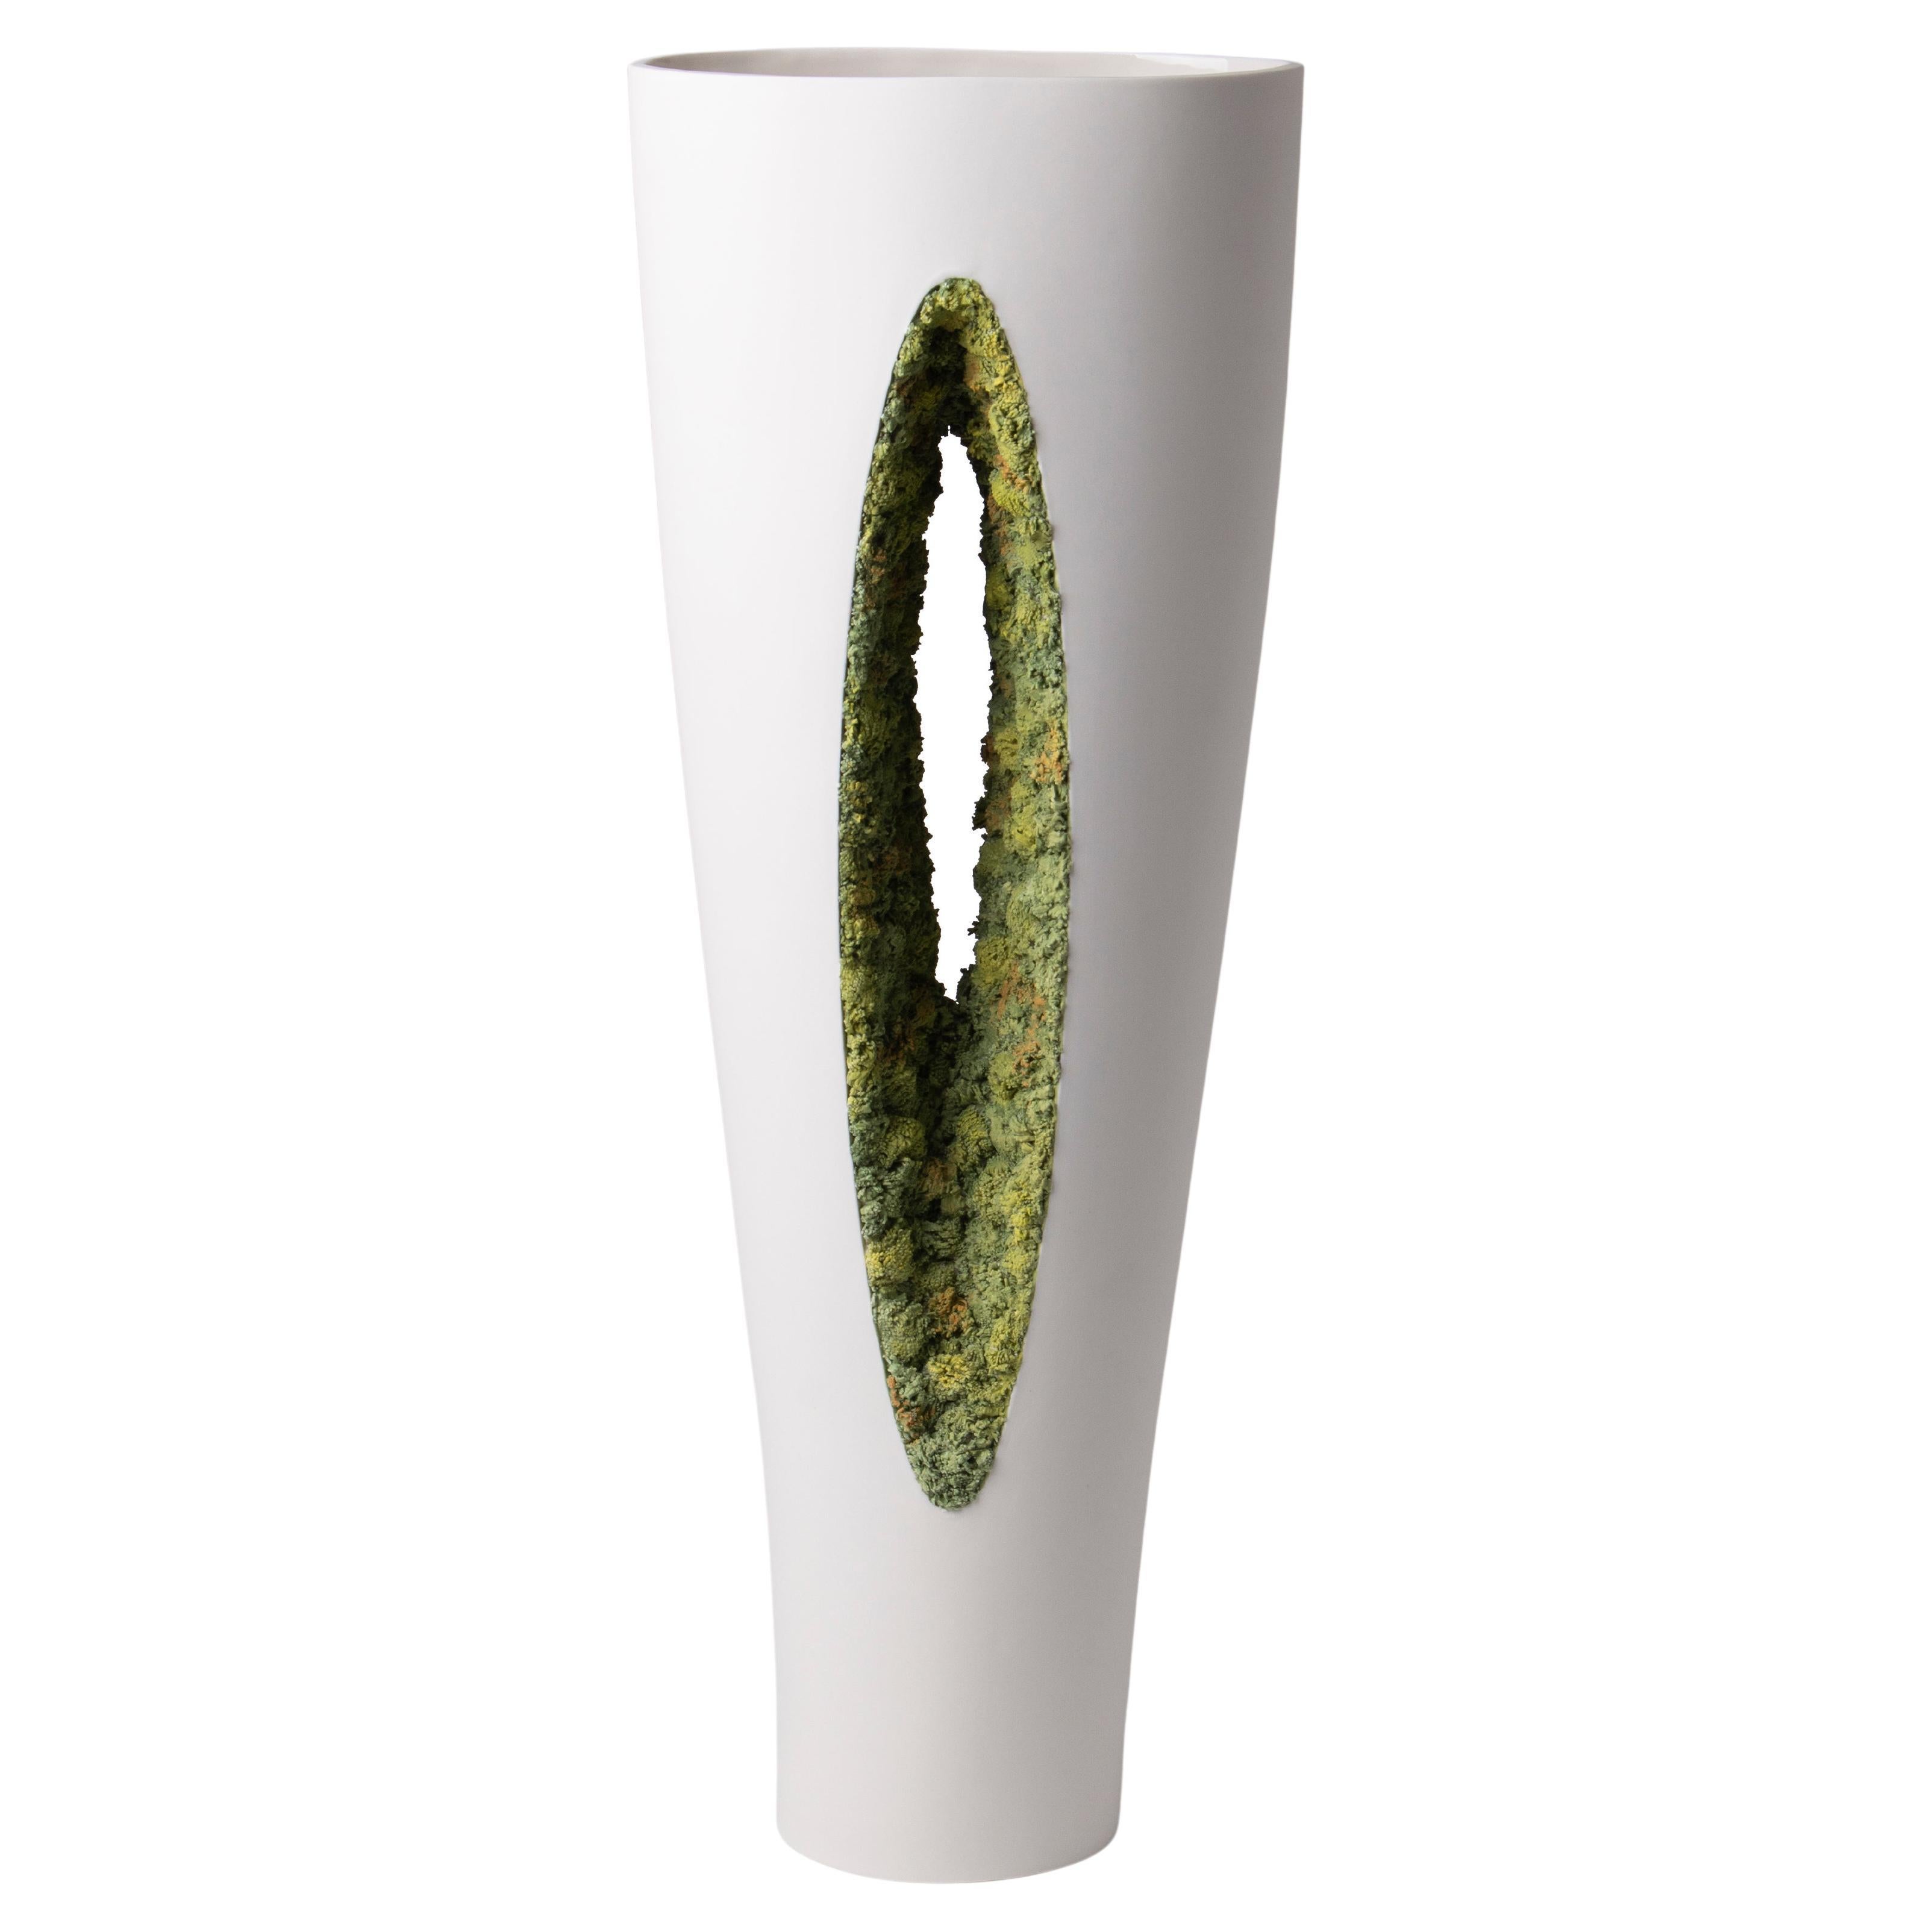 Contemporary Porcelain Tall Vase White Green Moss Ceramic Hand-Painted Fos For Sale